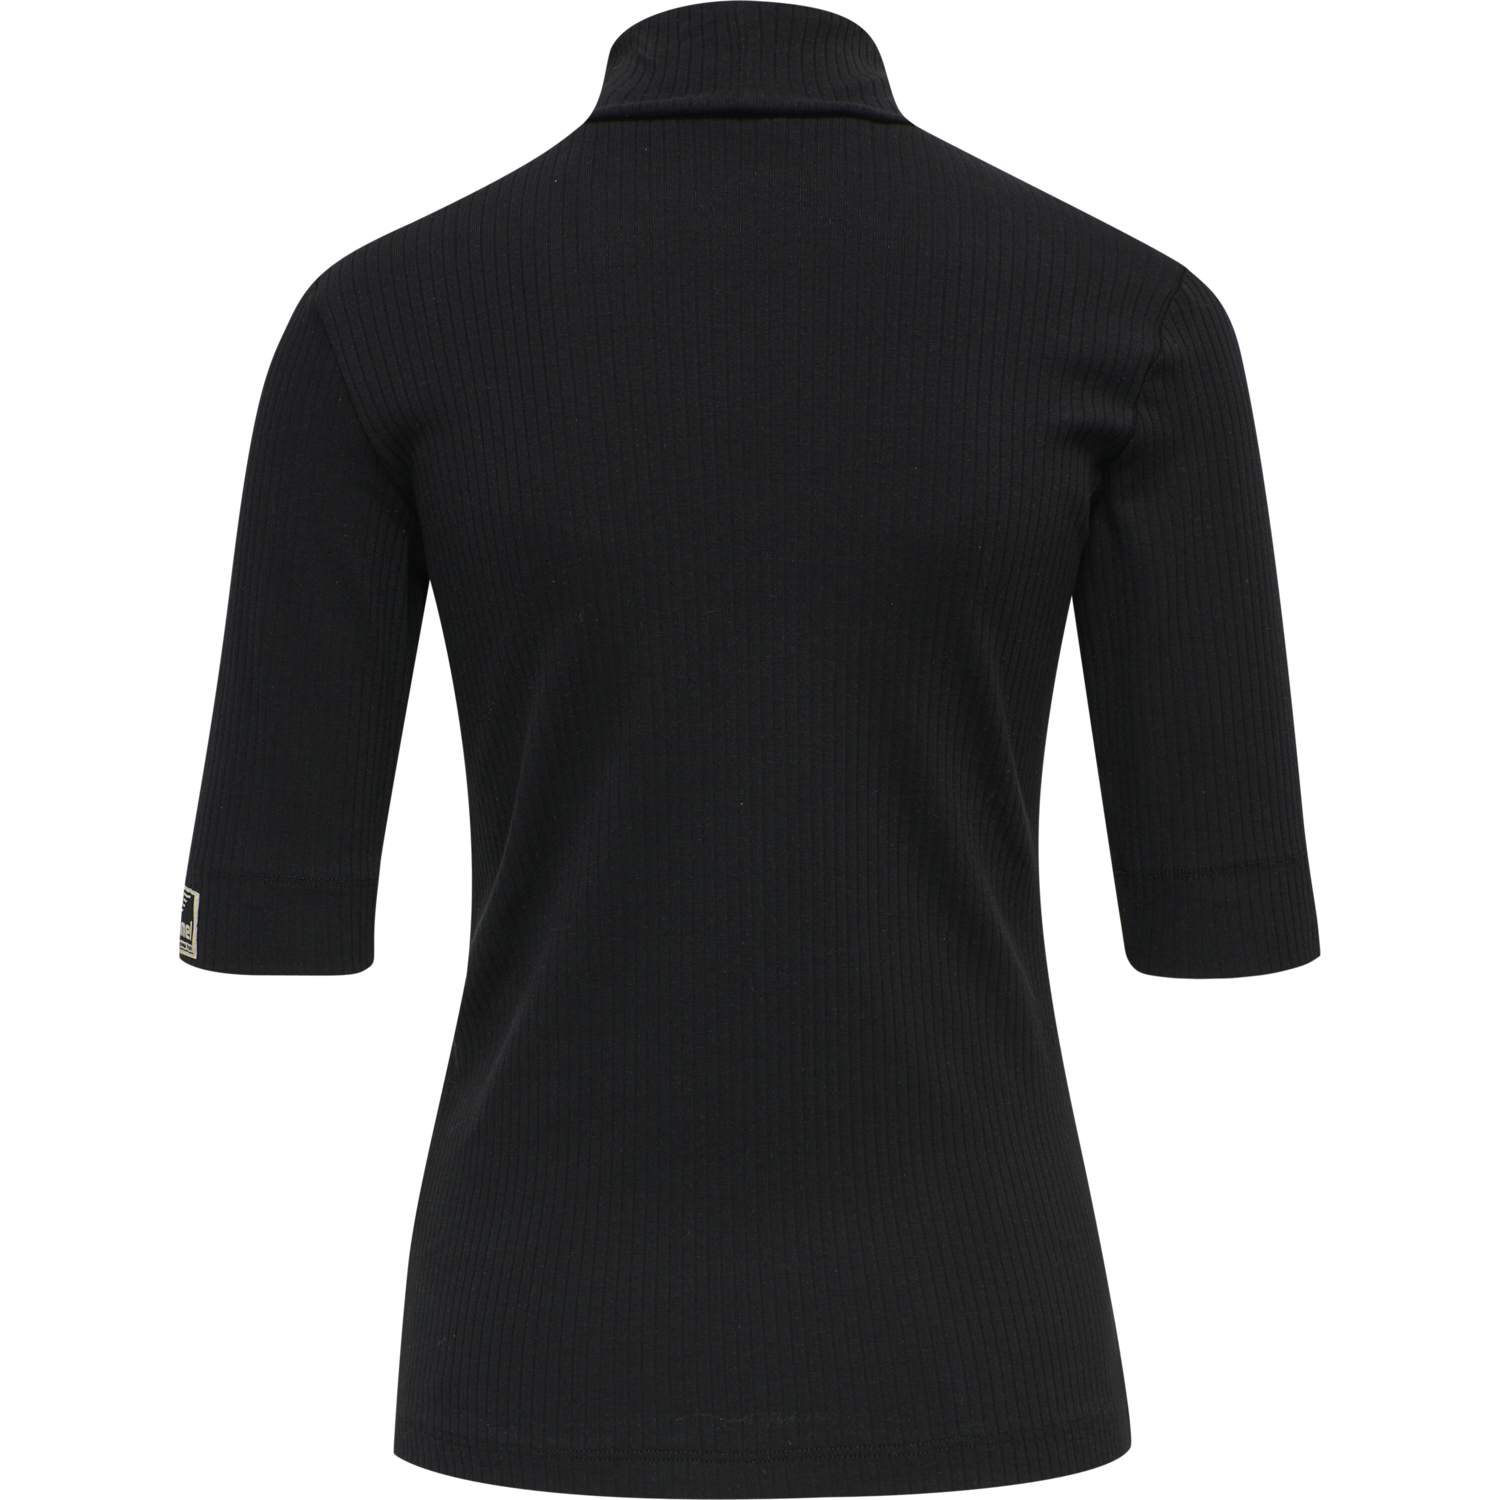 Turtle Neck Shirt PNG Picture